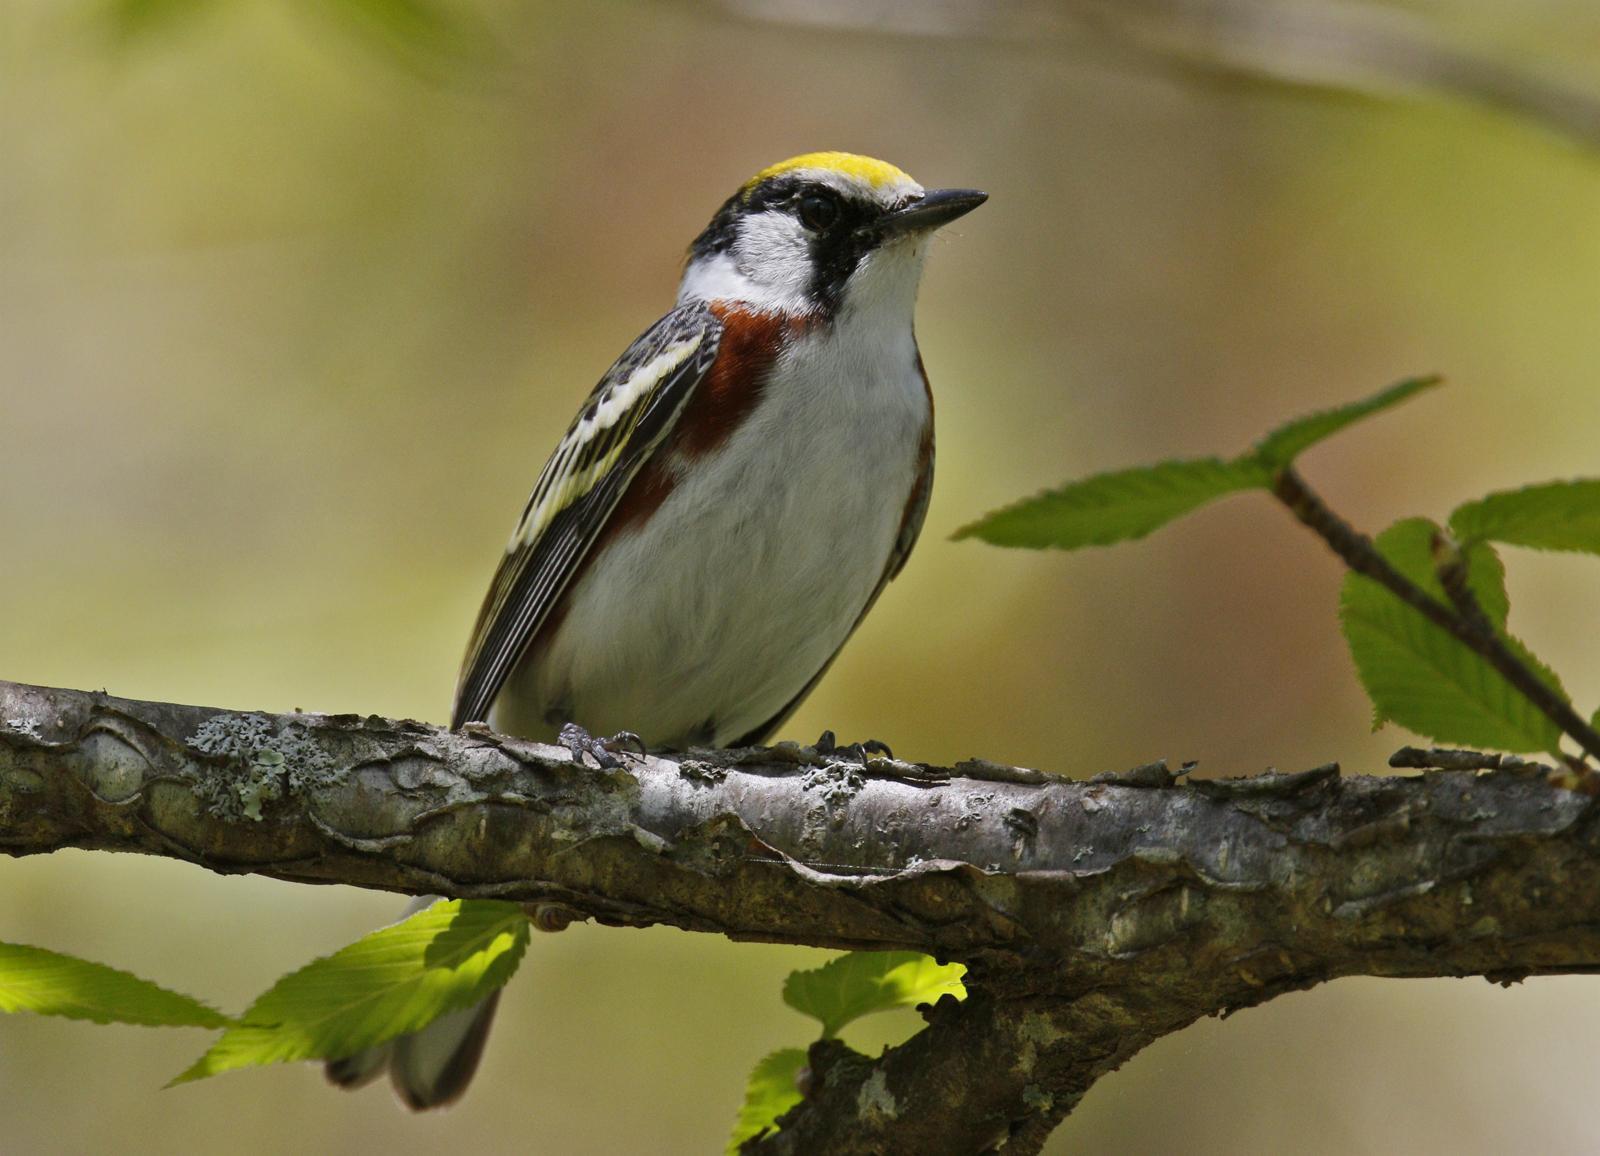 Chestnut-sided Warbler Photo by Emily Willoughby